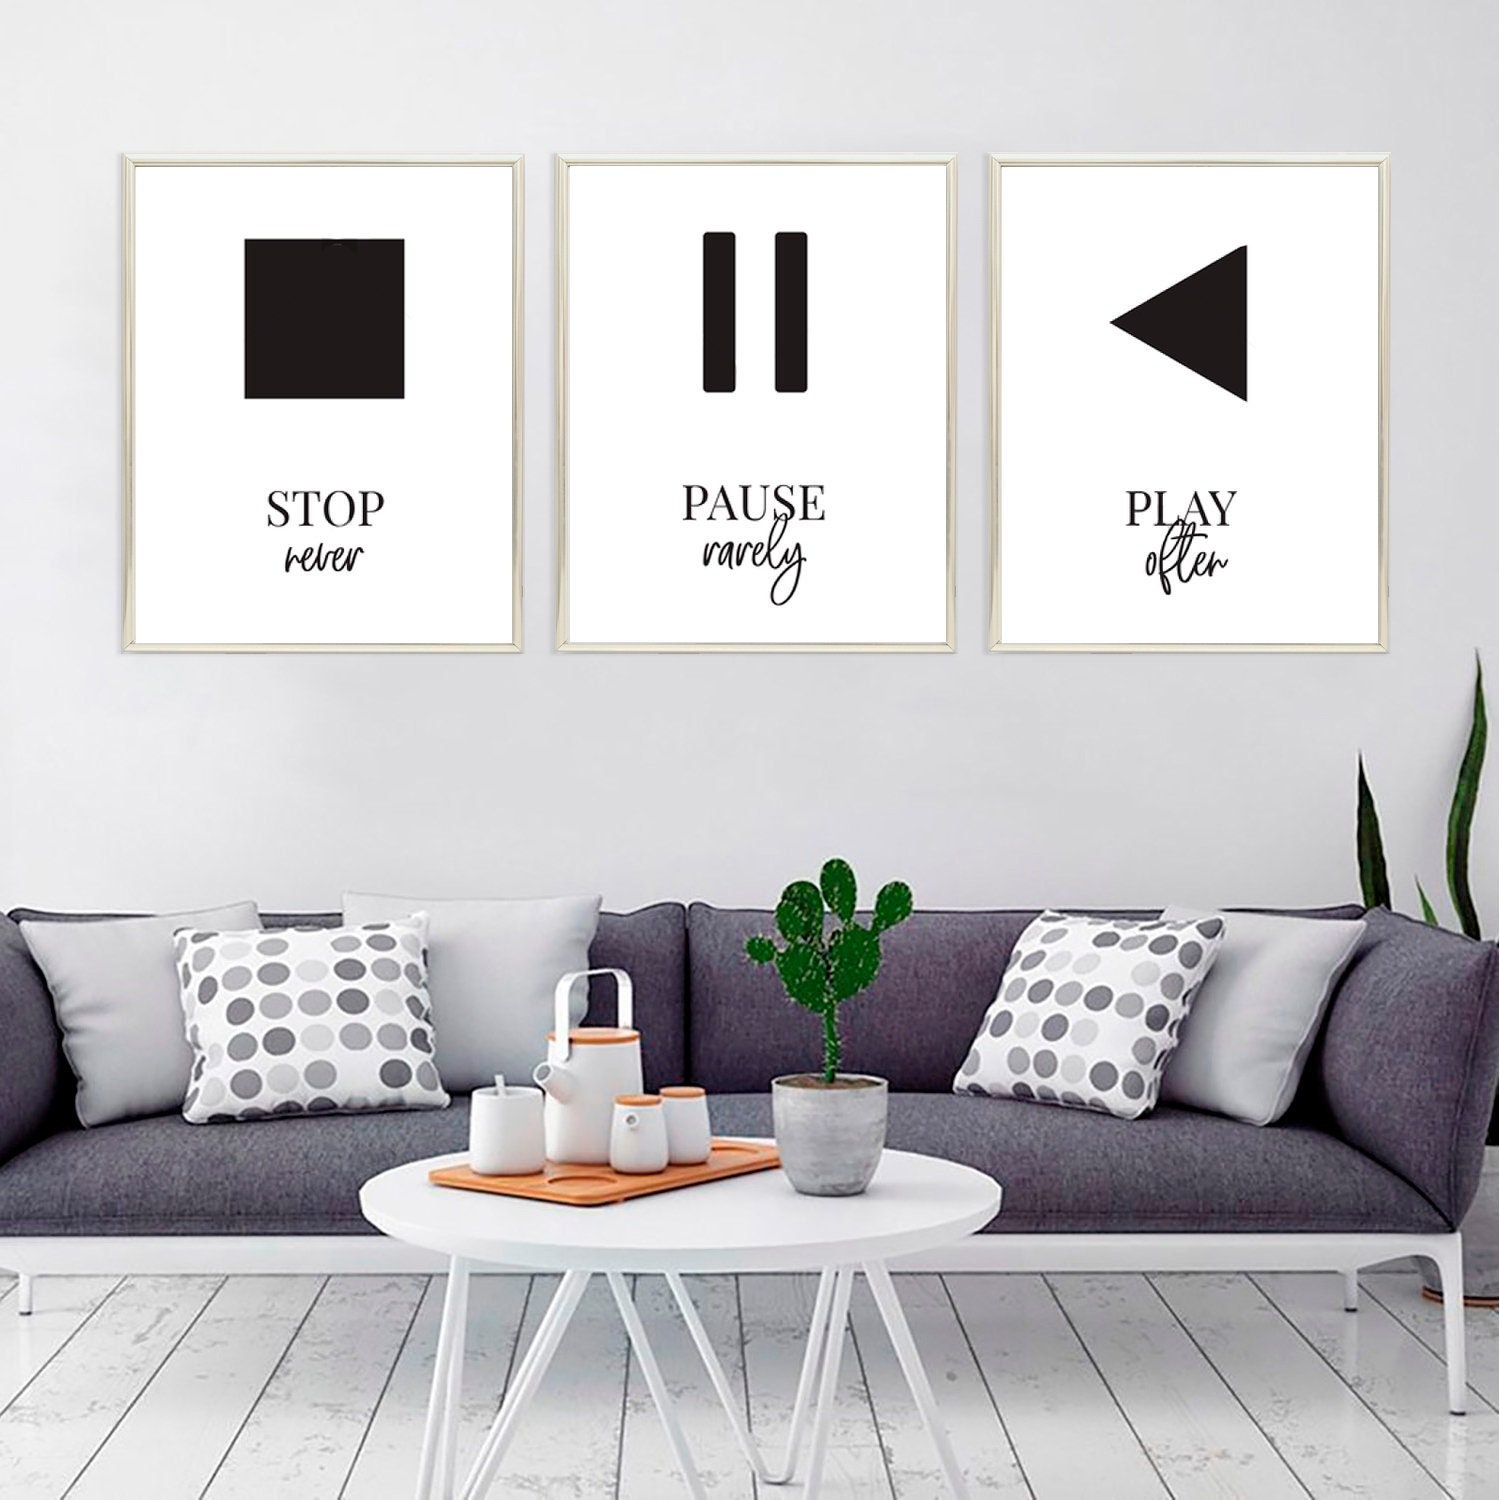 Remote control buttons 2 press play, rewind, fast forward, record, pause or  mute Greeting Card for Sale by Artonmytee